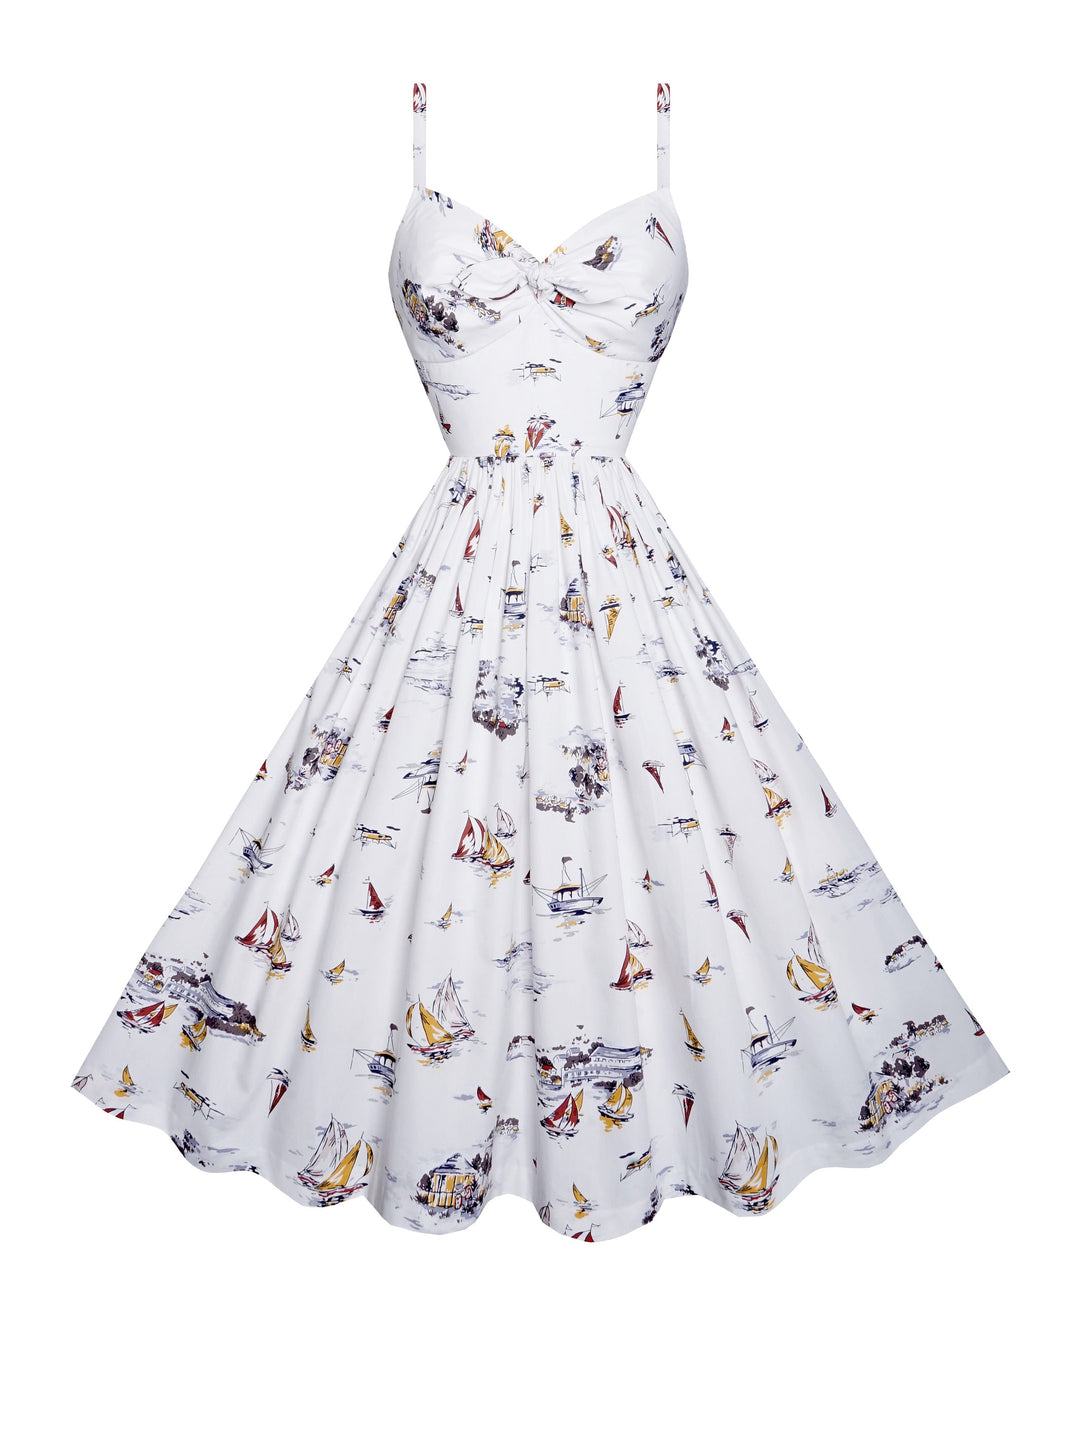 RTS - Size S - Josie Dress in White "Don't Tip the Boat"